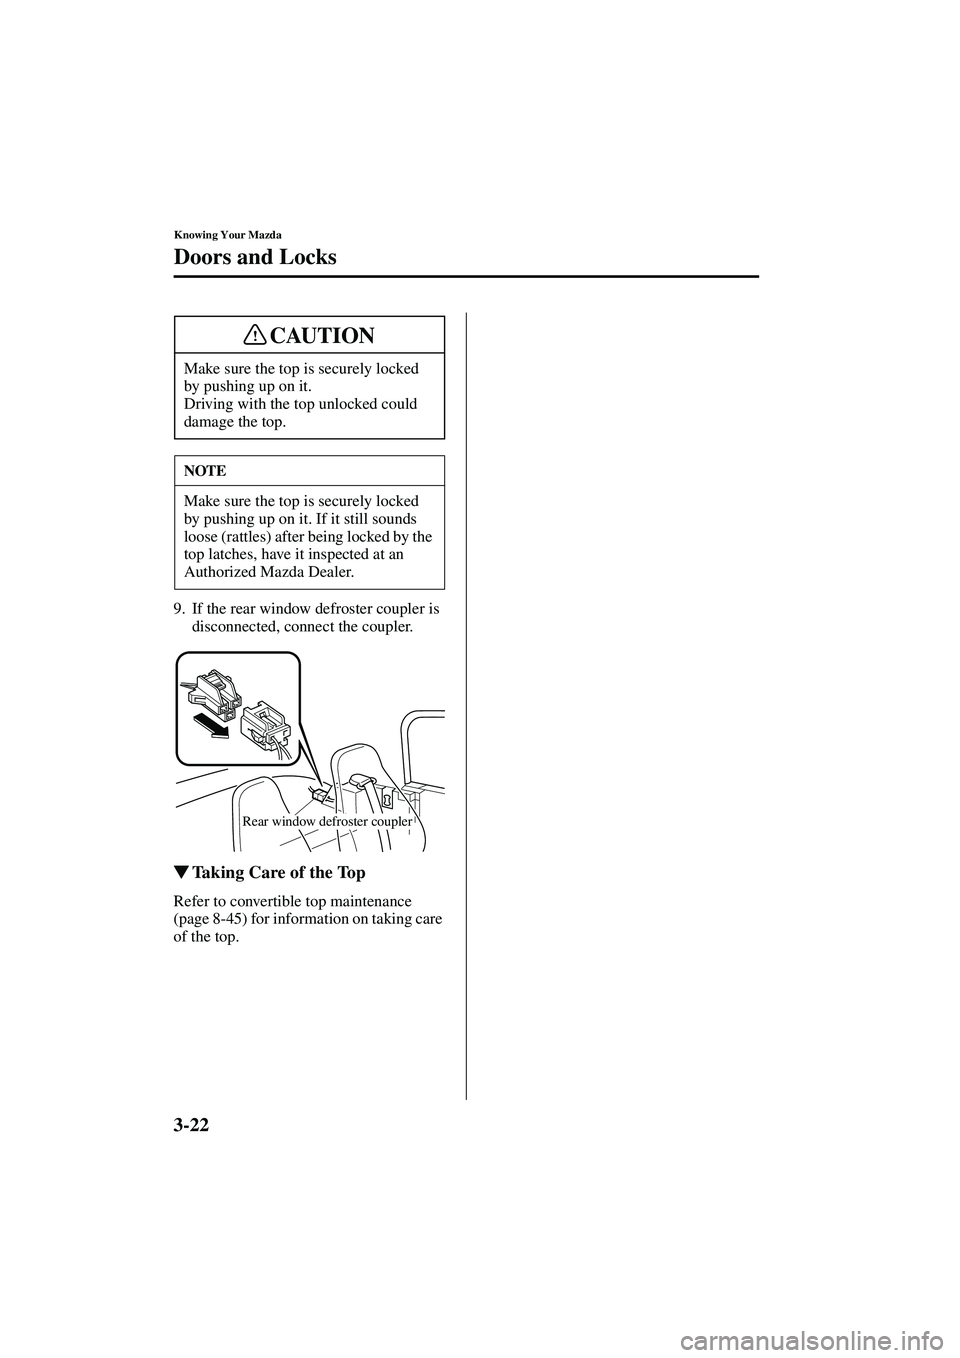 MAZDA MODEL MX-5 MIATA 2004  Owners Manual 3-22
Knowing Your Mazda
Doors and Locks
Form No. 8S15-EA-03G
9. If the rear window defroster coupler is disconnected, connect the coupler.
Taking Care of the Top
Refer to convertible top maintenance 